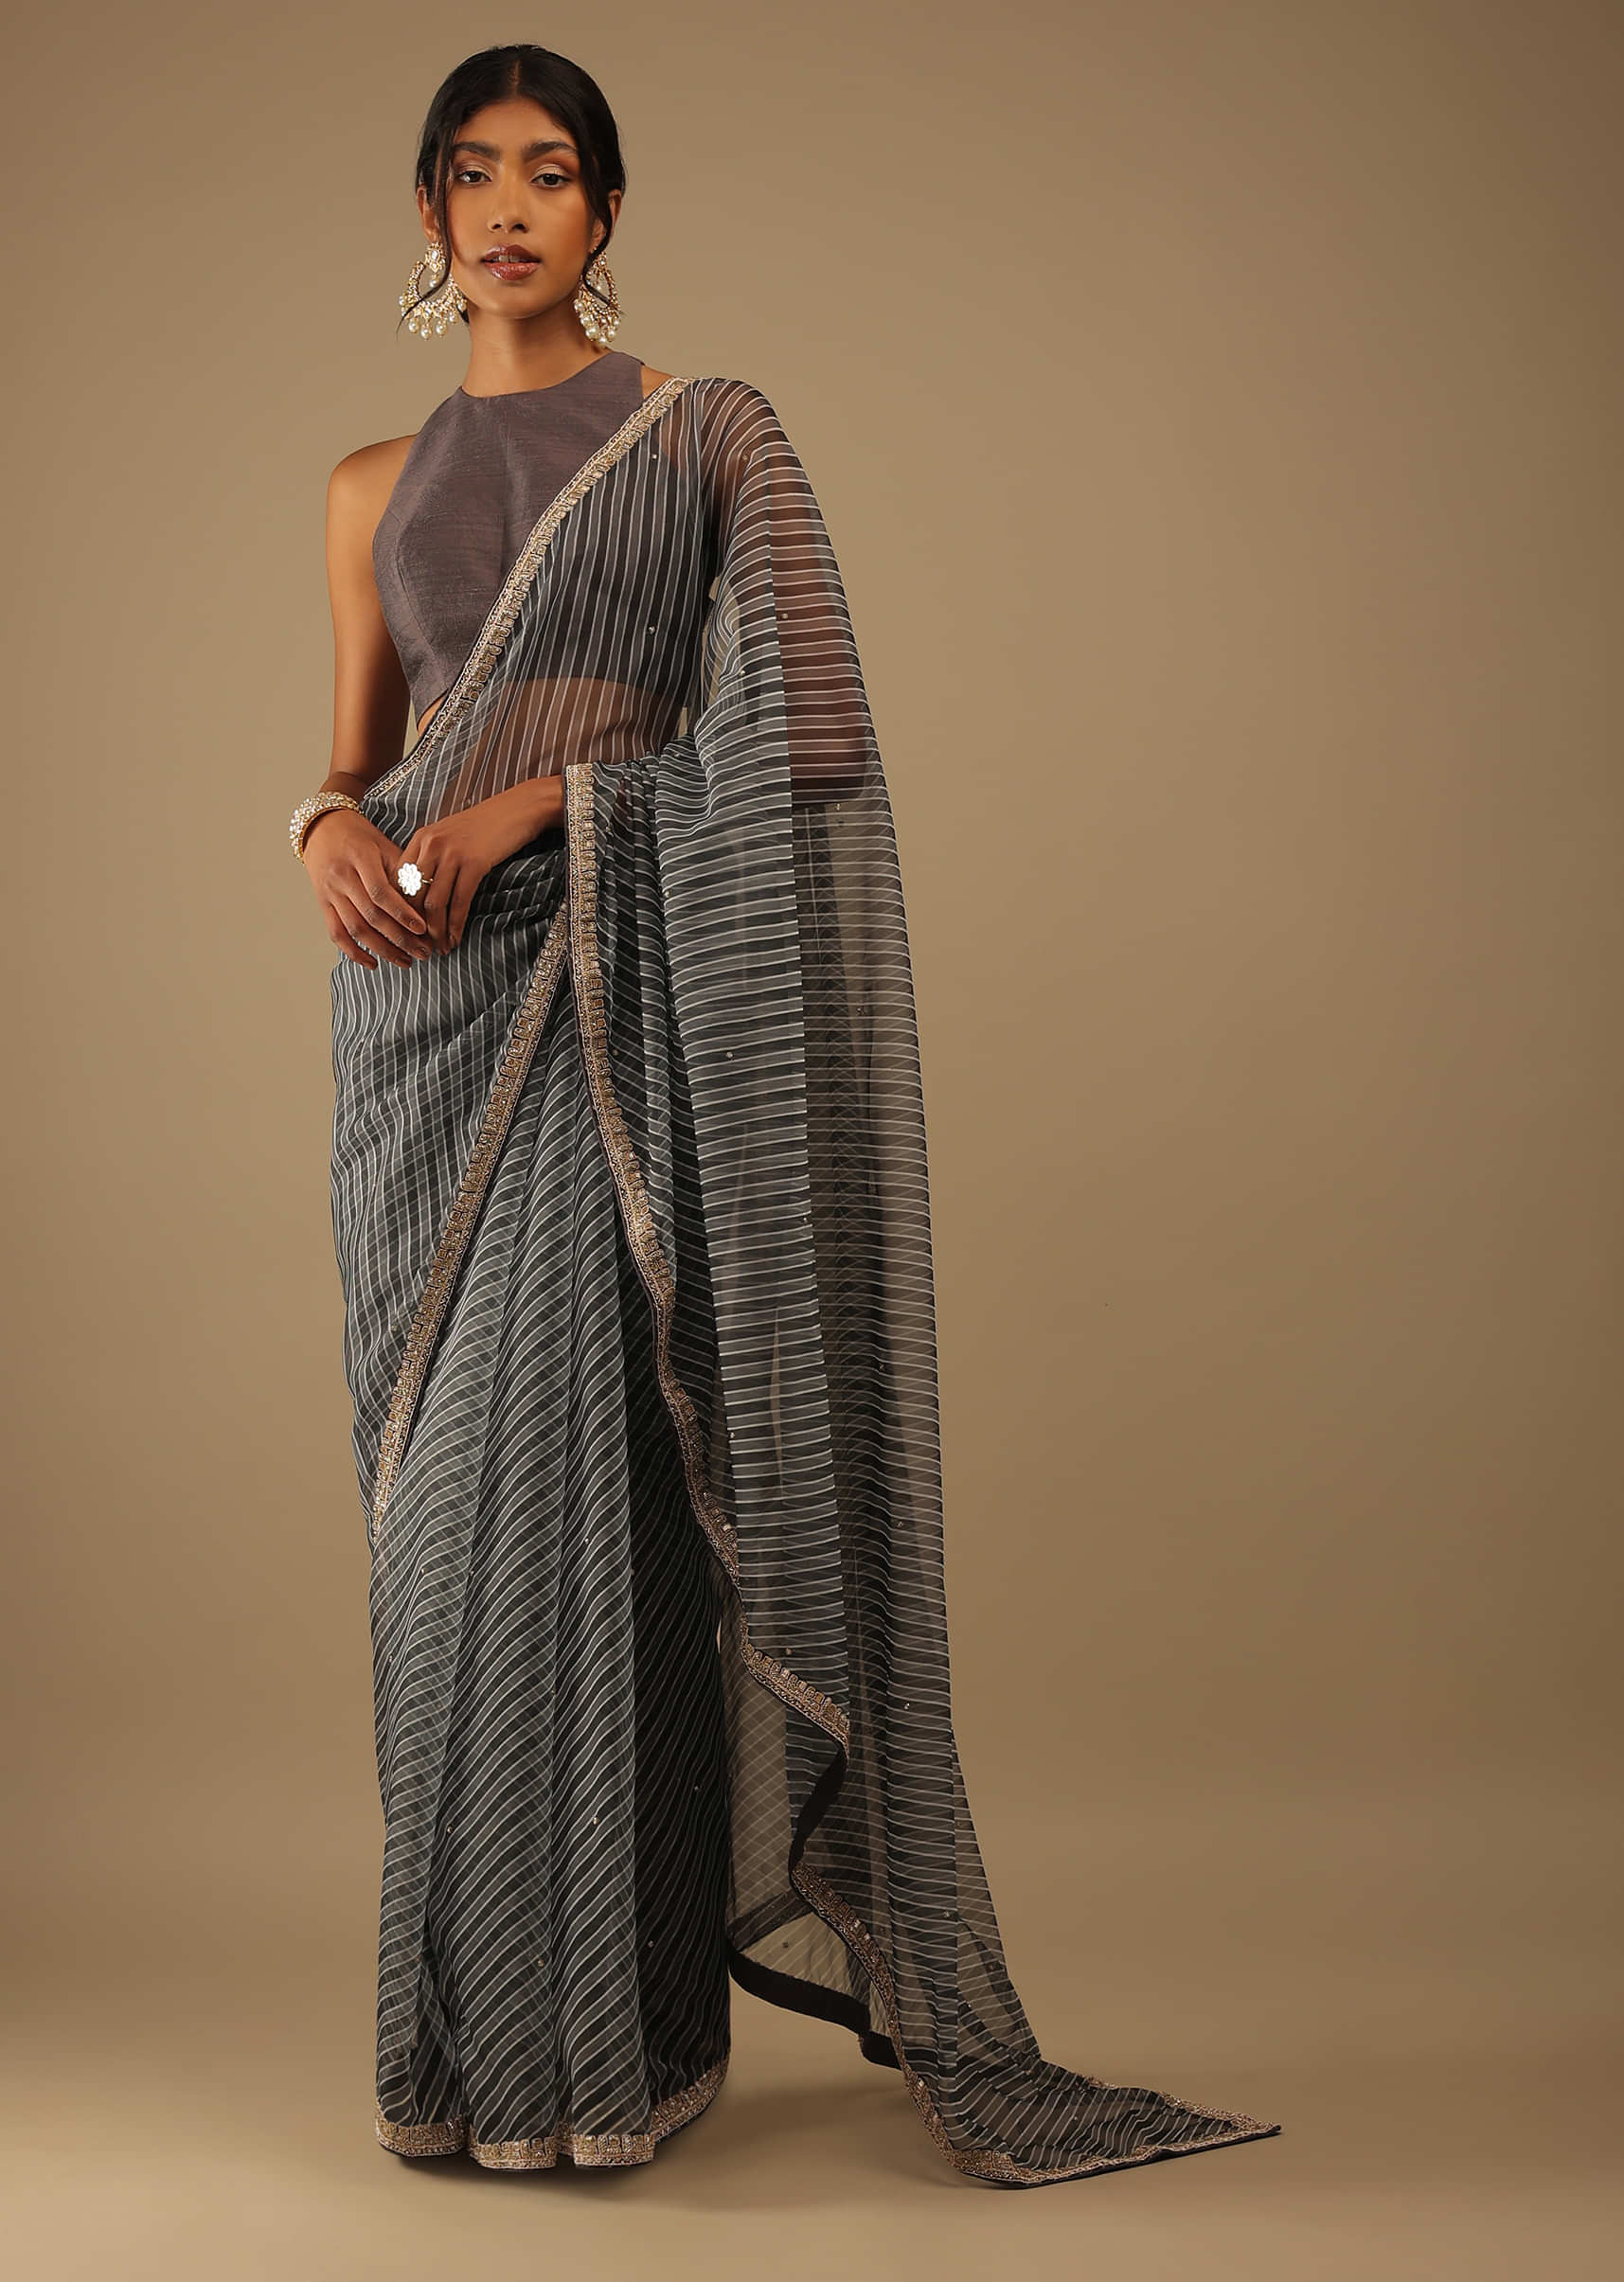 Black And Grey Leheriya Print Saree With Cut Dana Embroidery, Crafted In Silk Organza With Moti Floral Embroidery Buttis